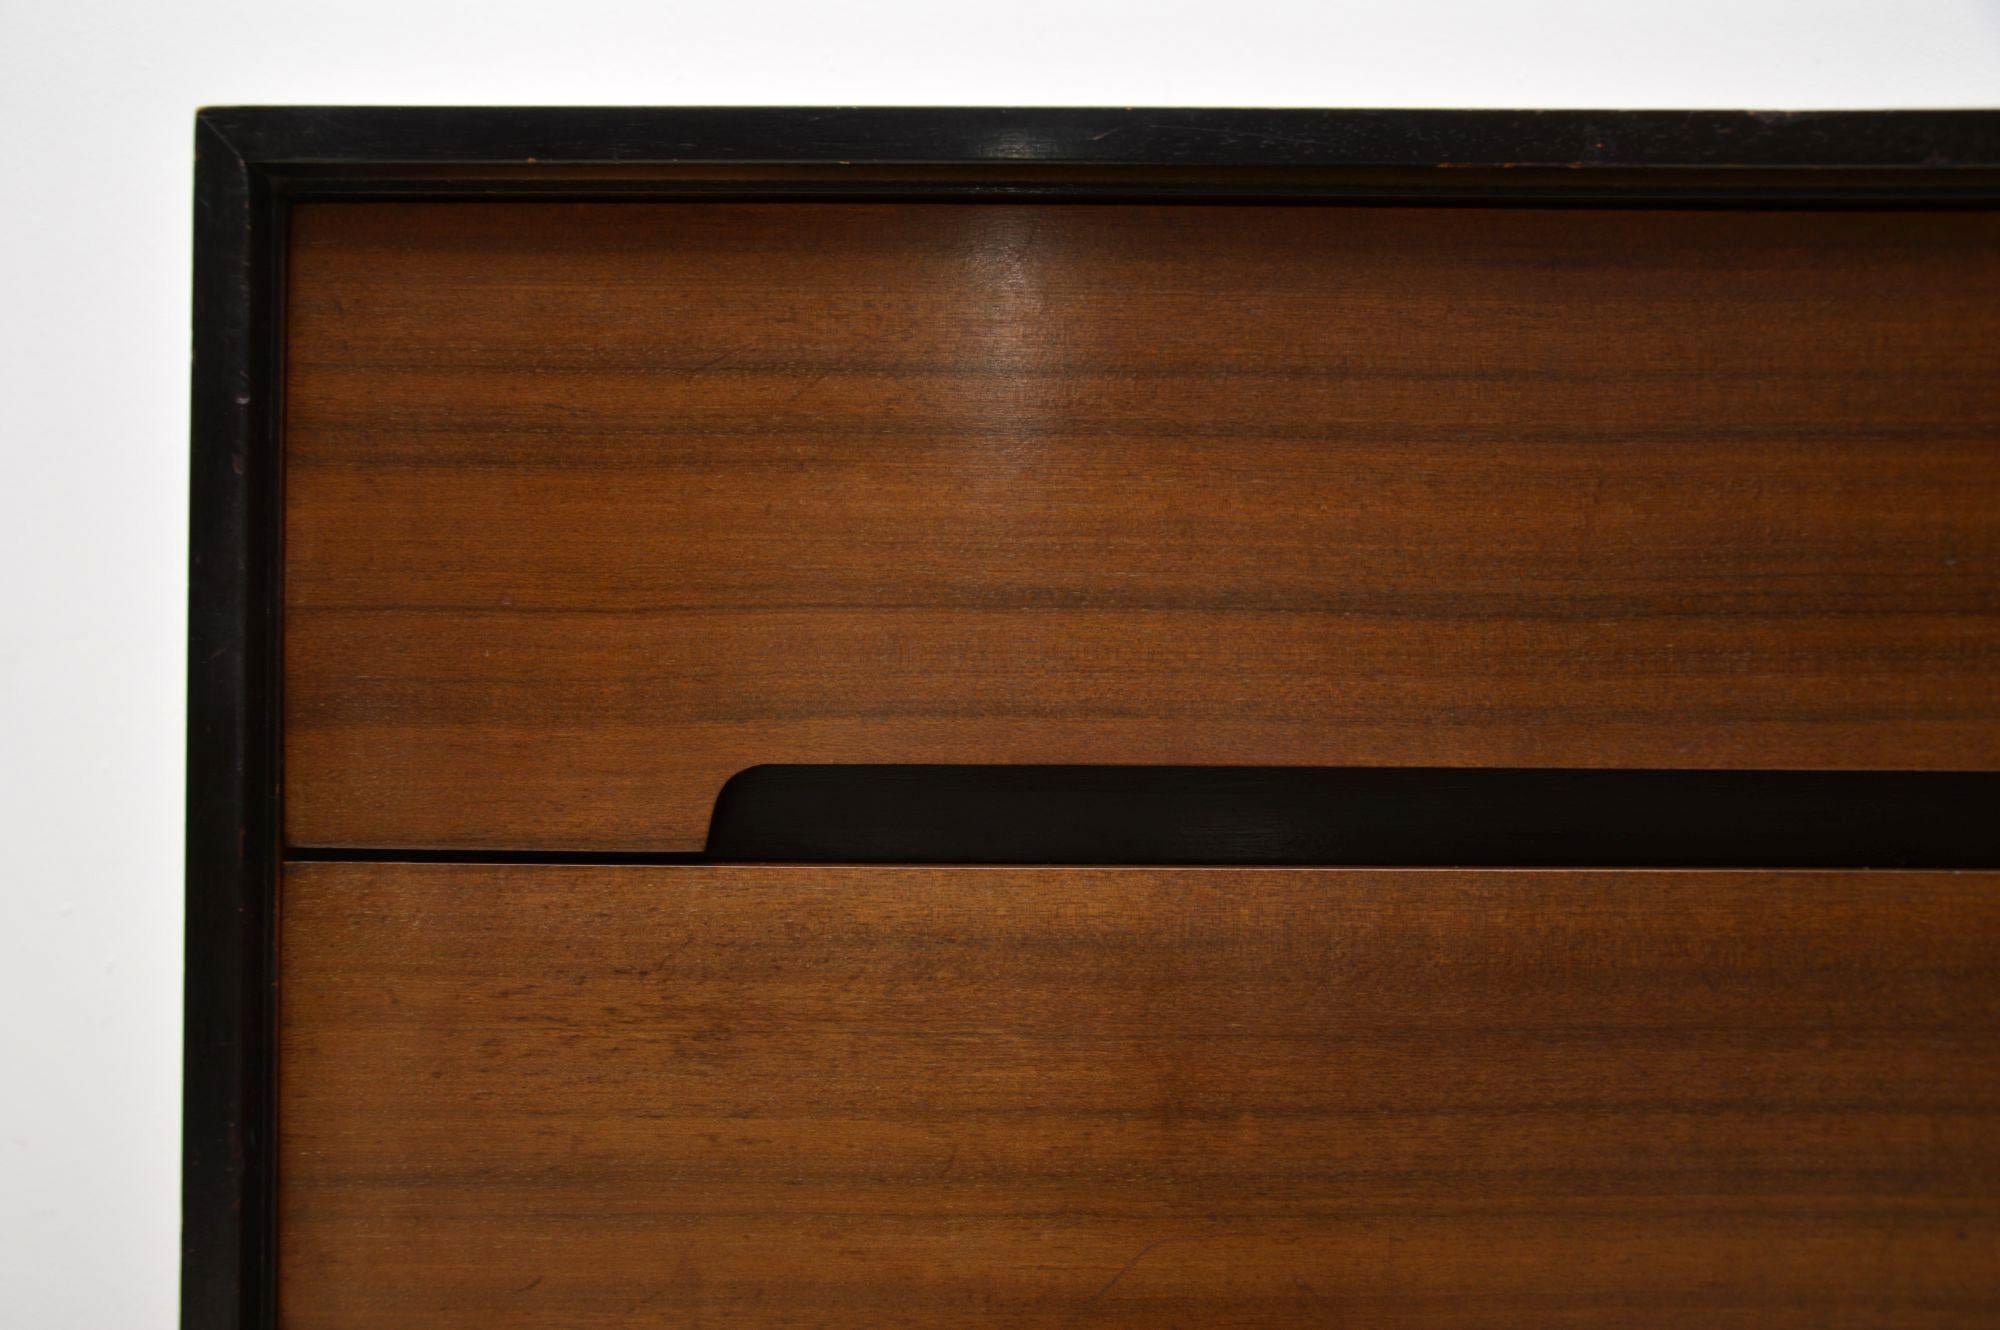 Mid-20th Century 1950s Vintage Walnut Chest of Drawers by John & Sylvia Reid for Stag C Range